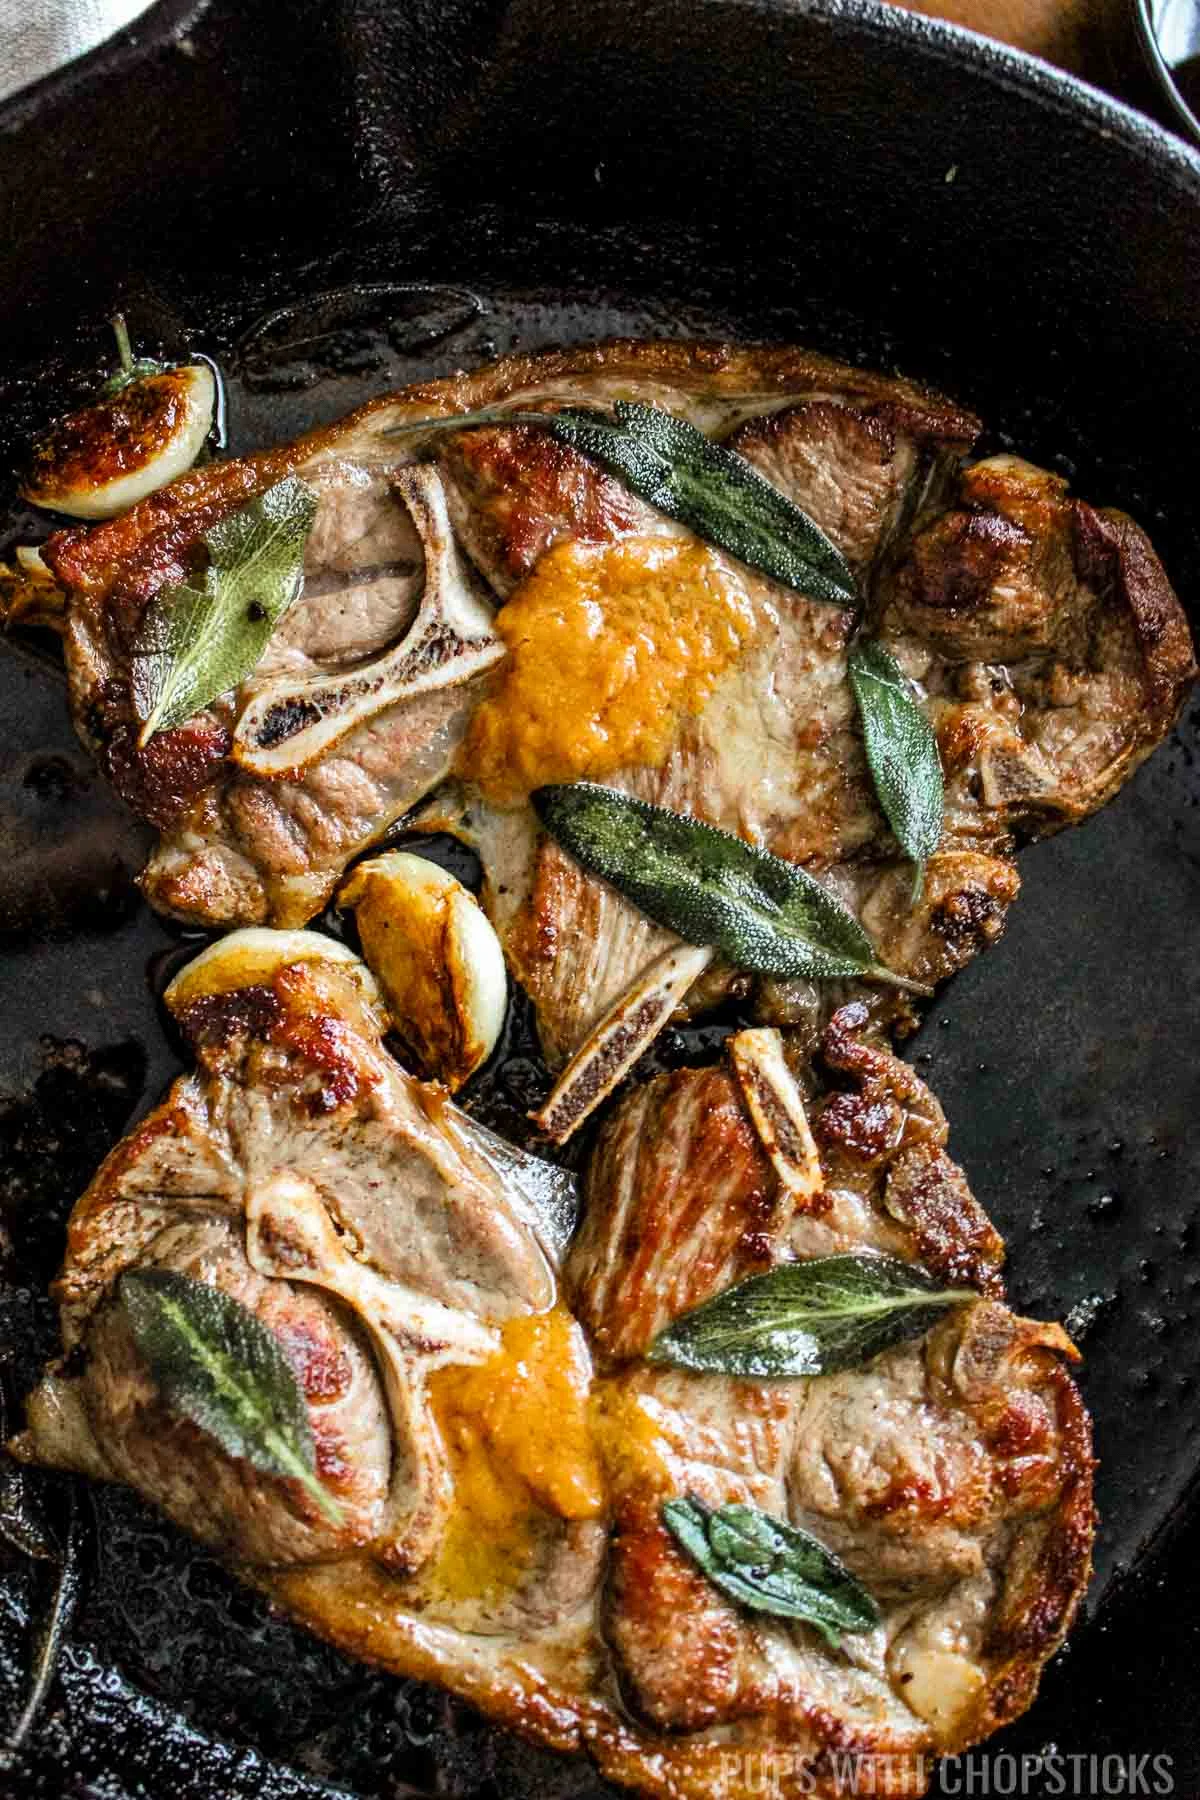 Miso butter pan fried lamb shoulder chops with garlic and sage on a cast iron pan